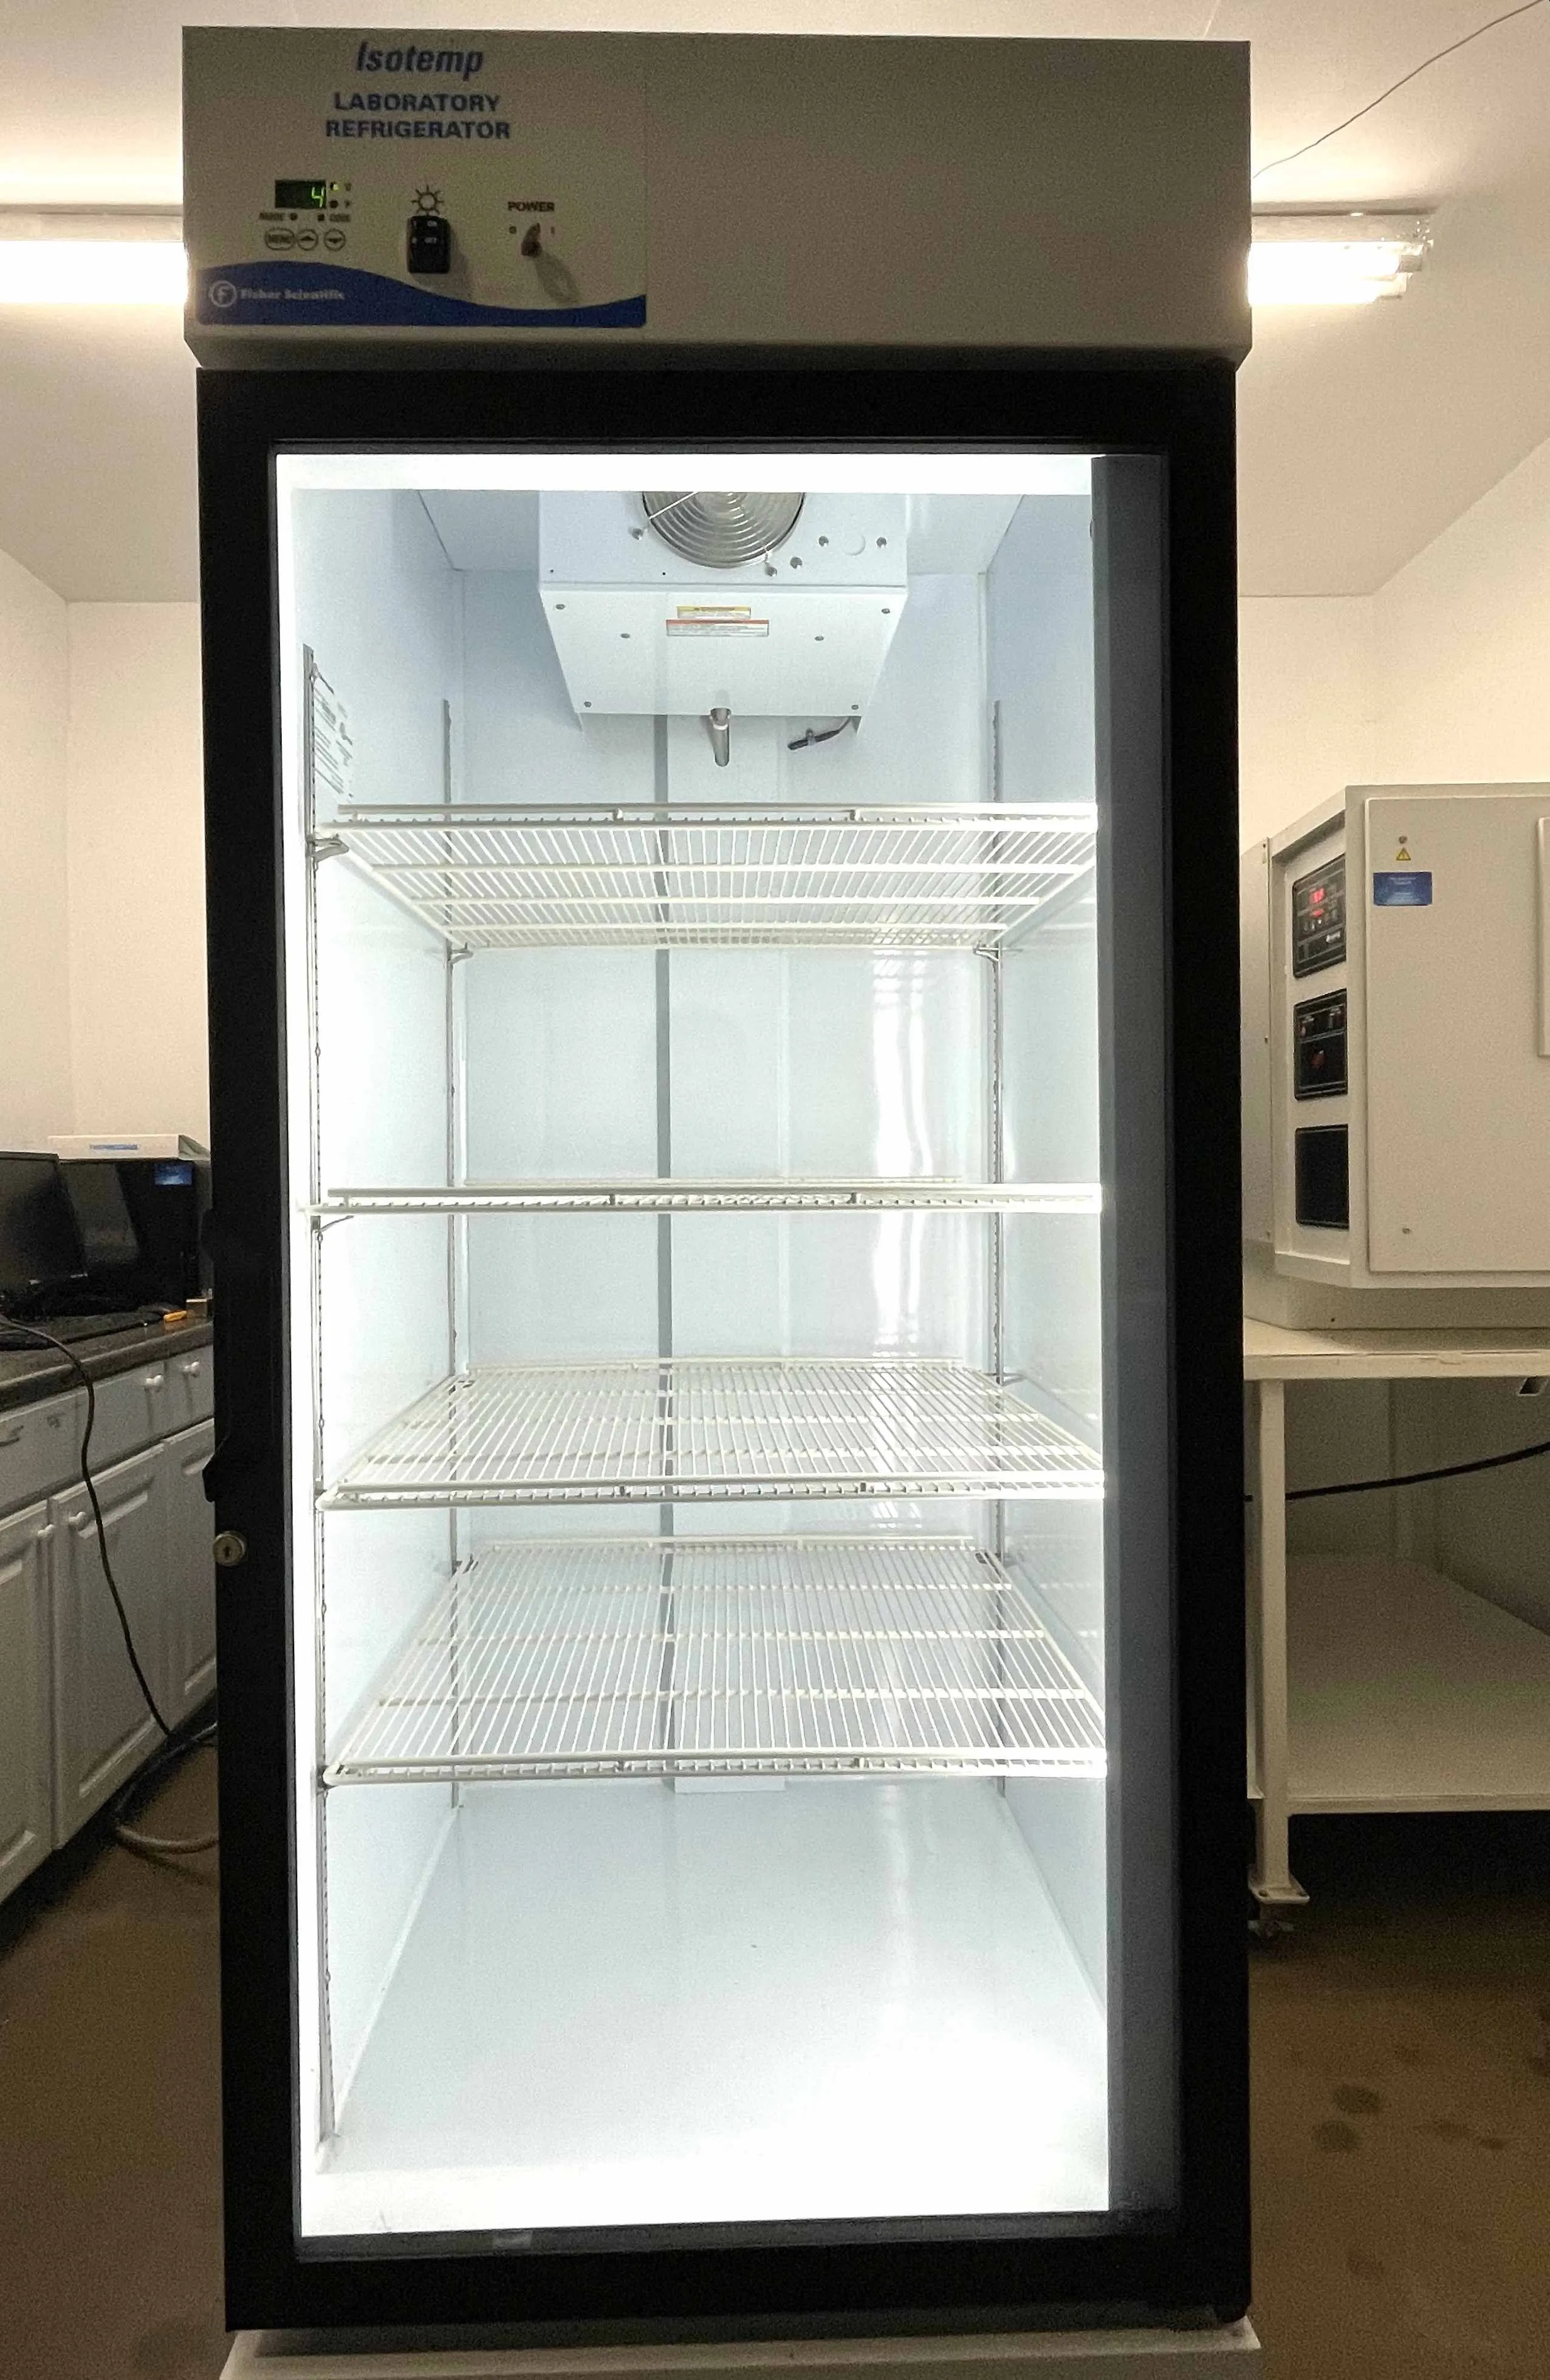 Isotemp Single Glass Door Lab Refrigerator -- Fully Functional and Warranty